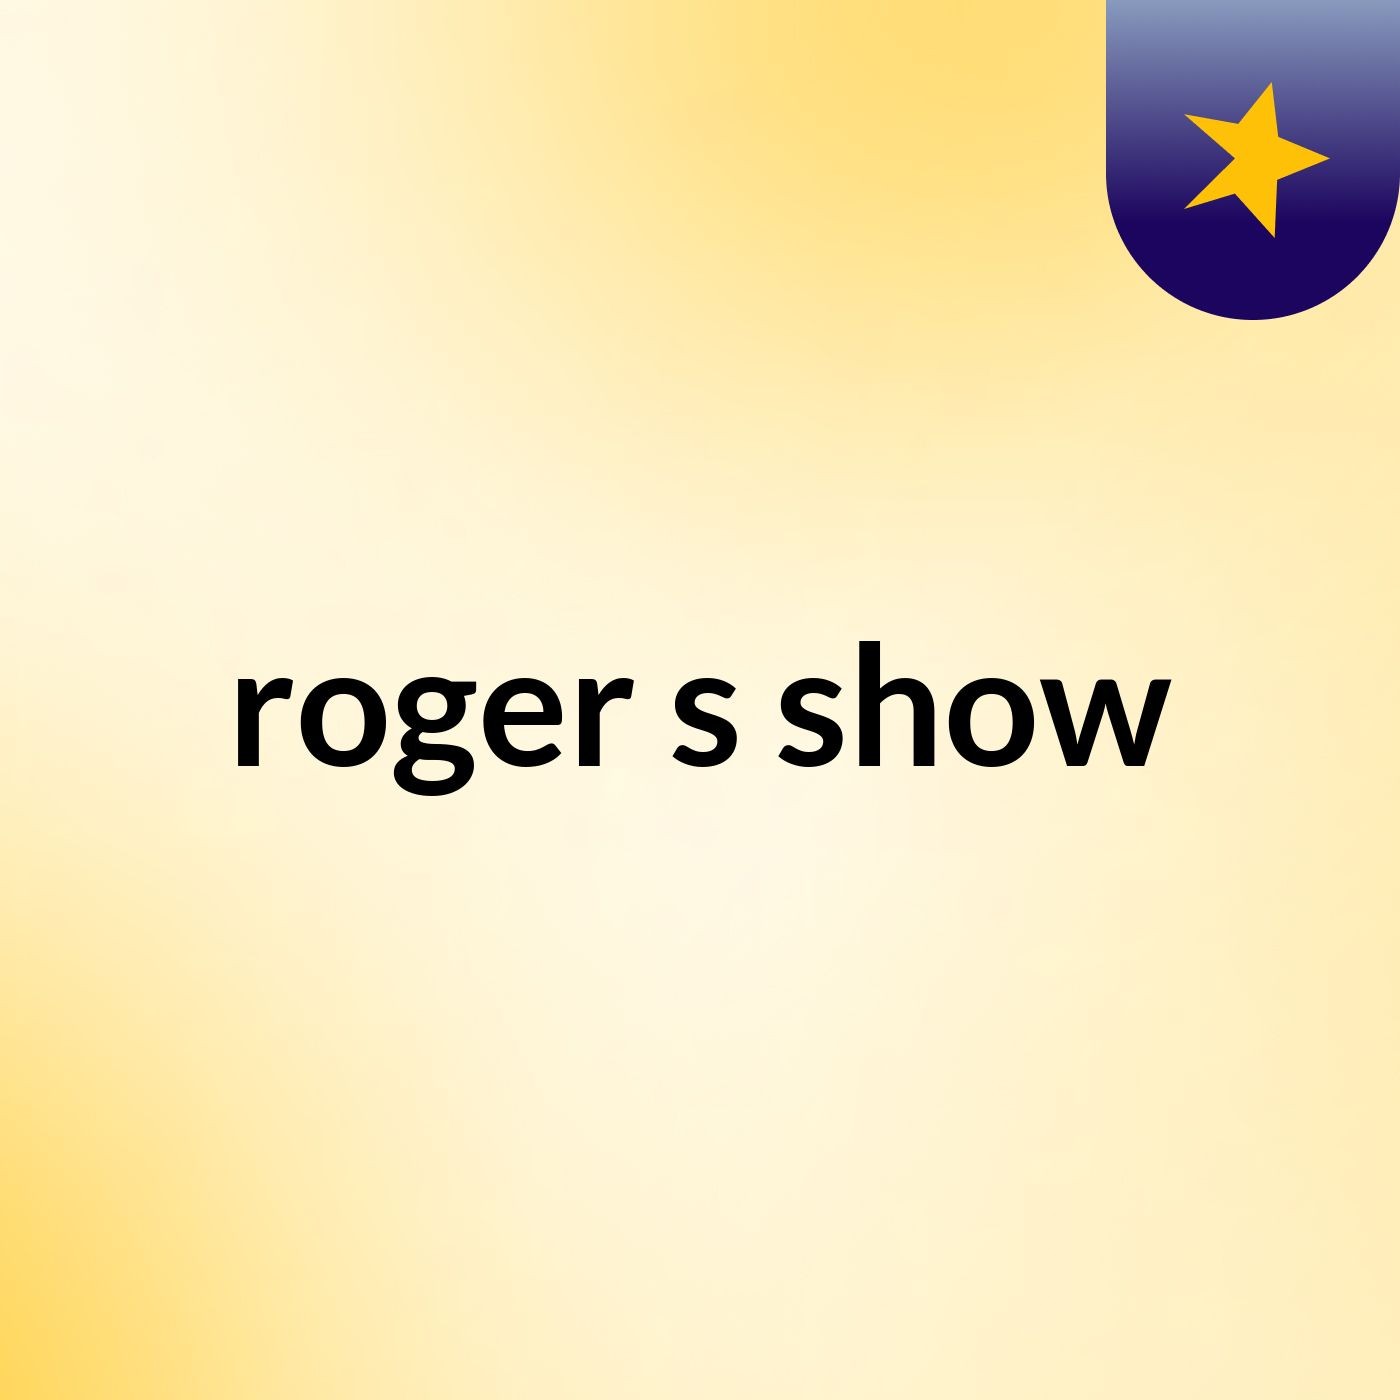 roger's show